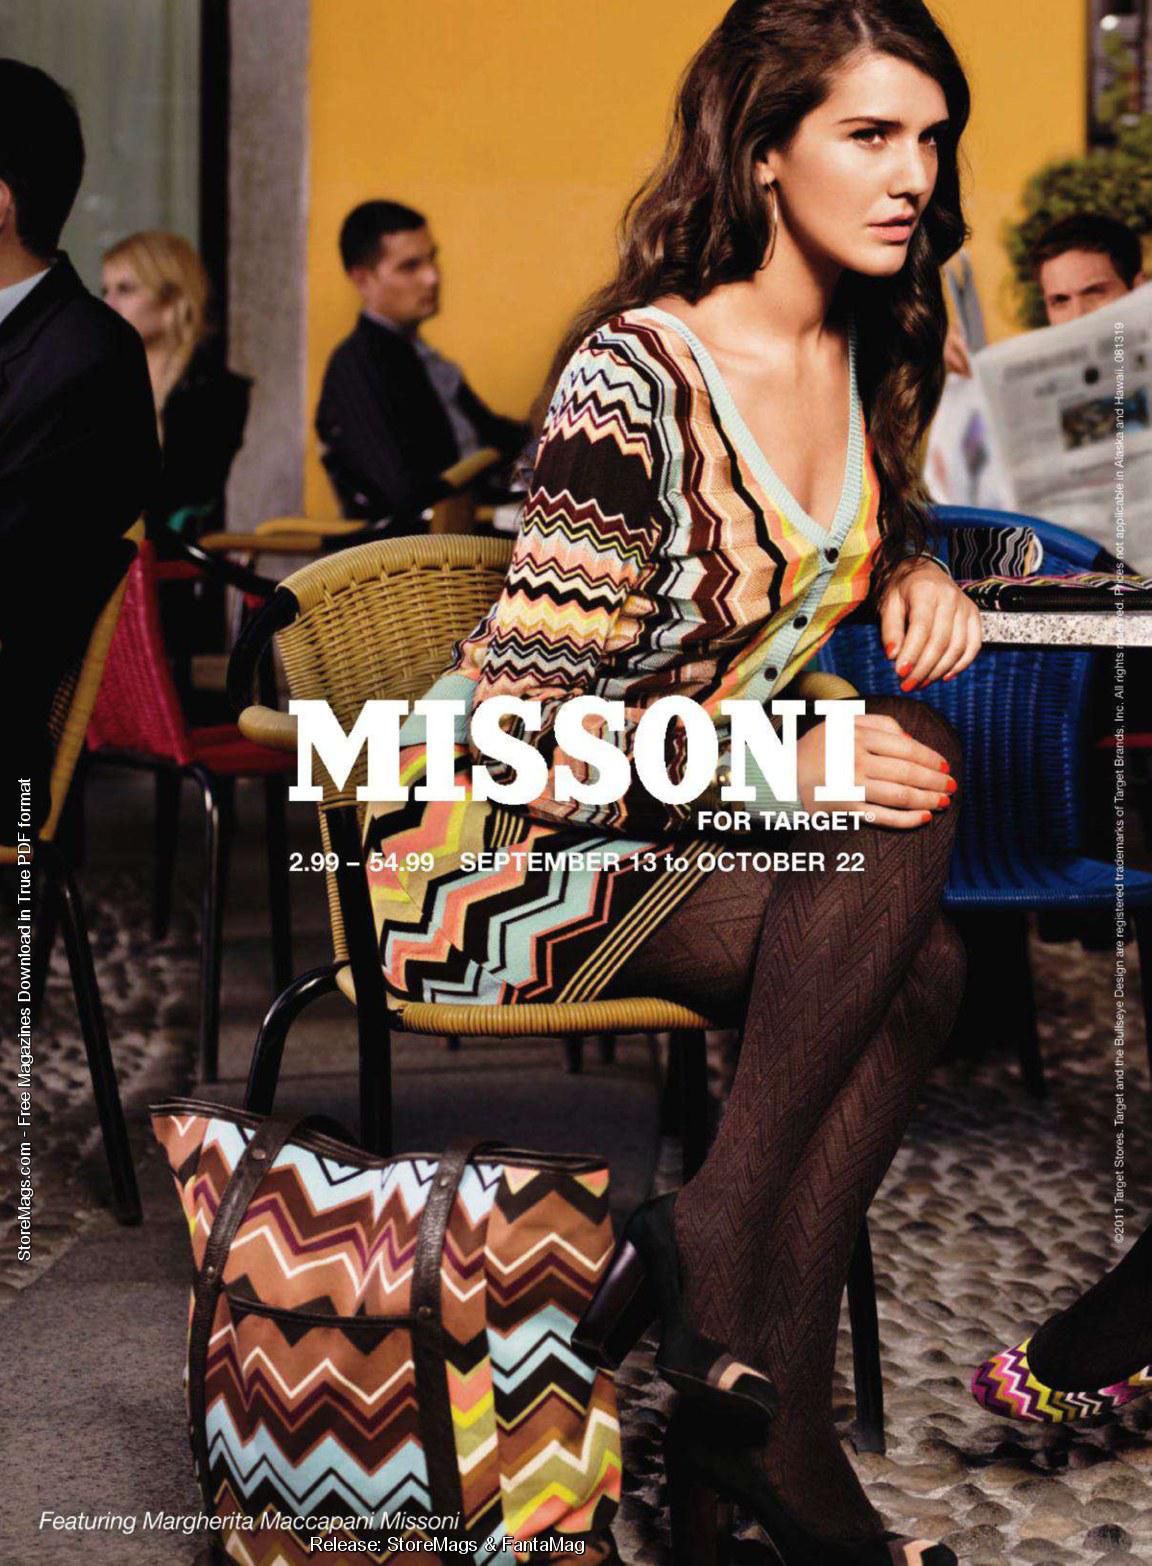 Maryam Maquillage: A Tribute to Missoni